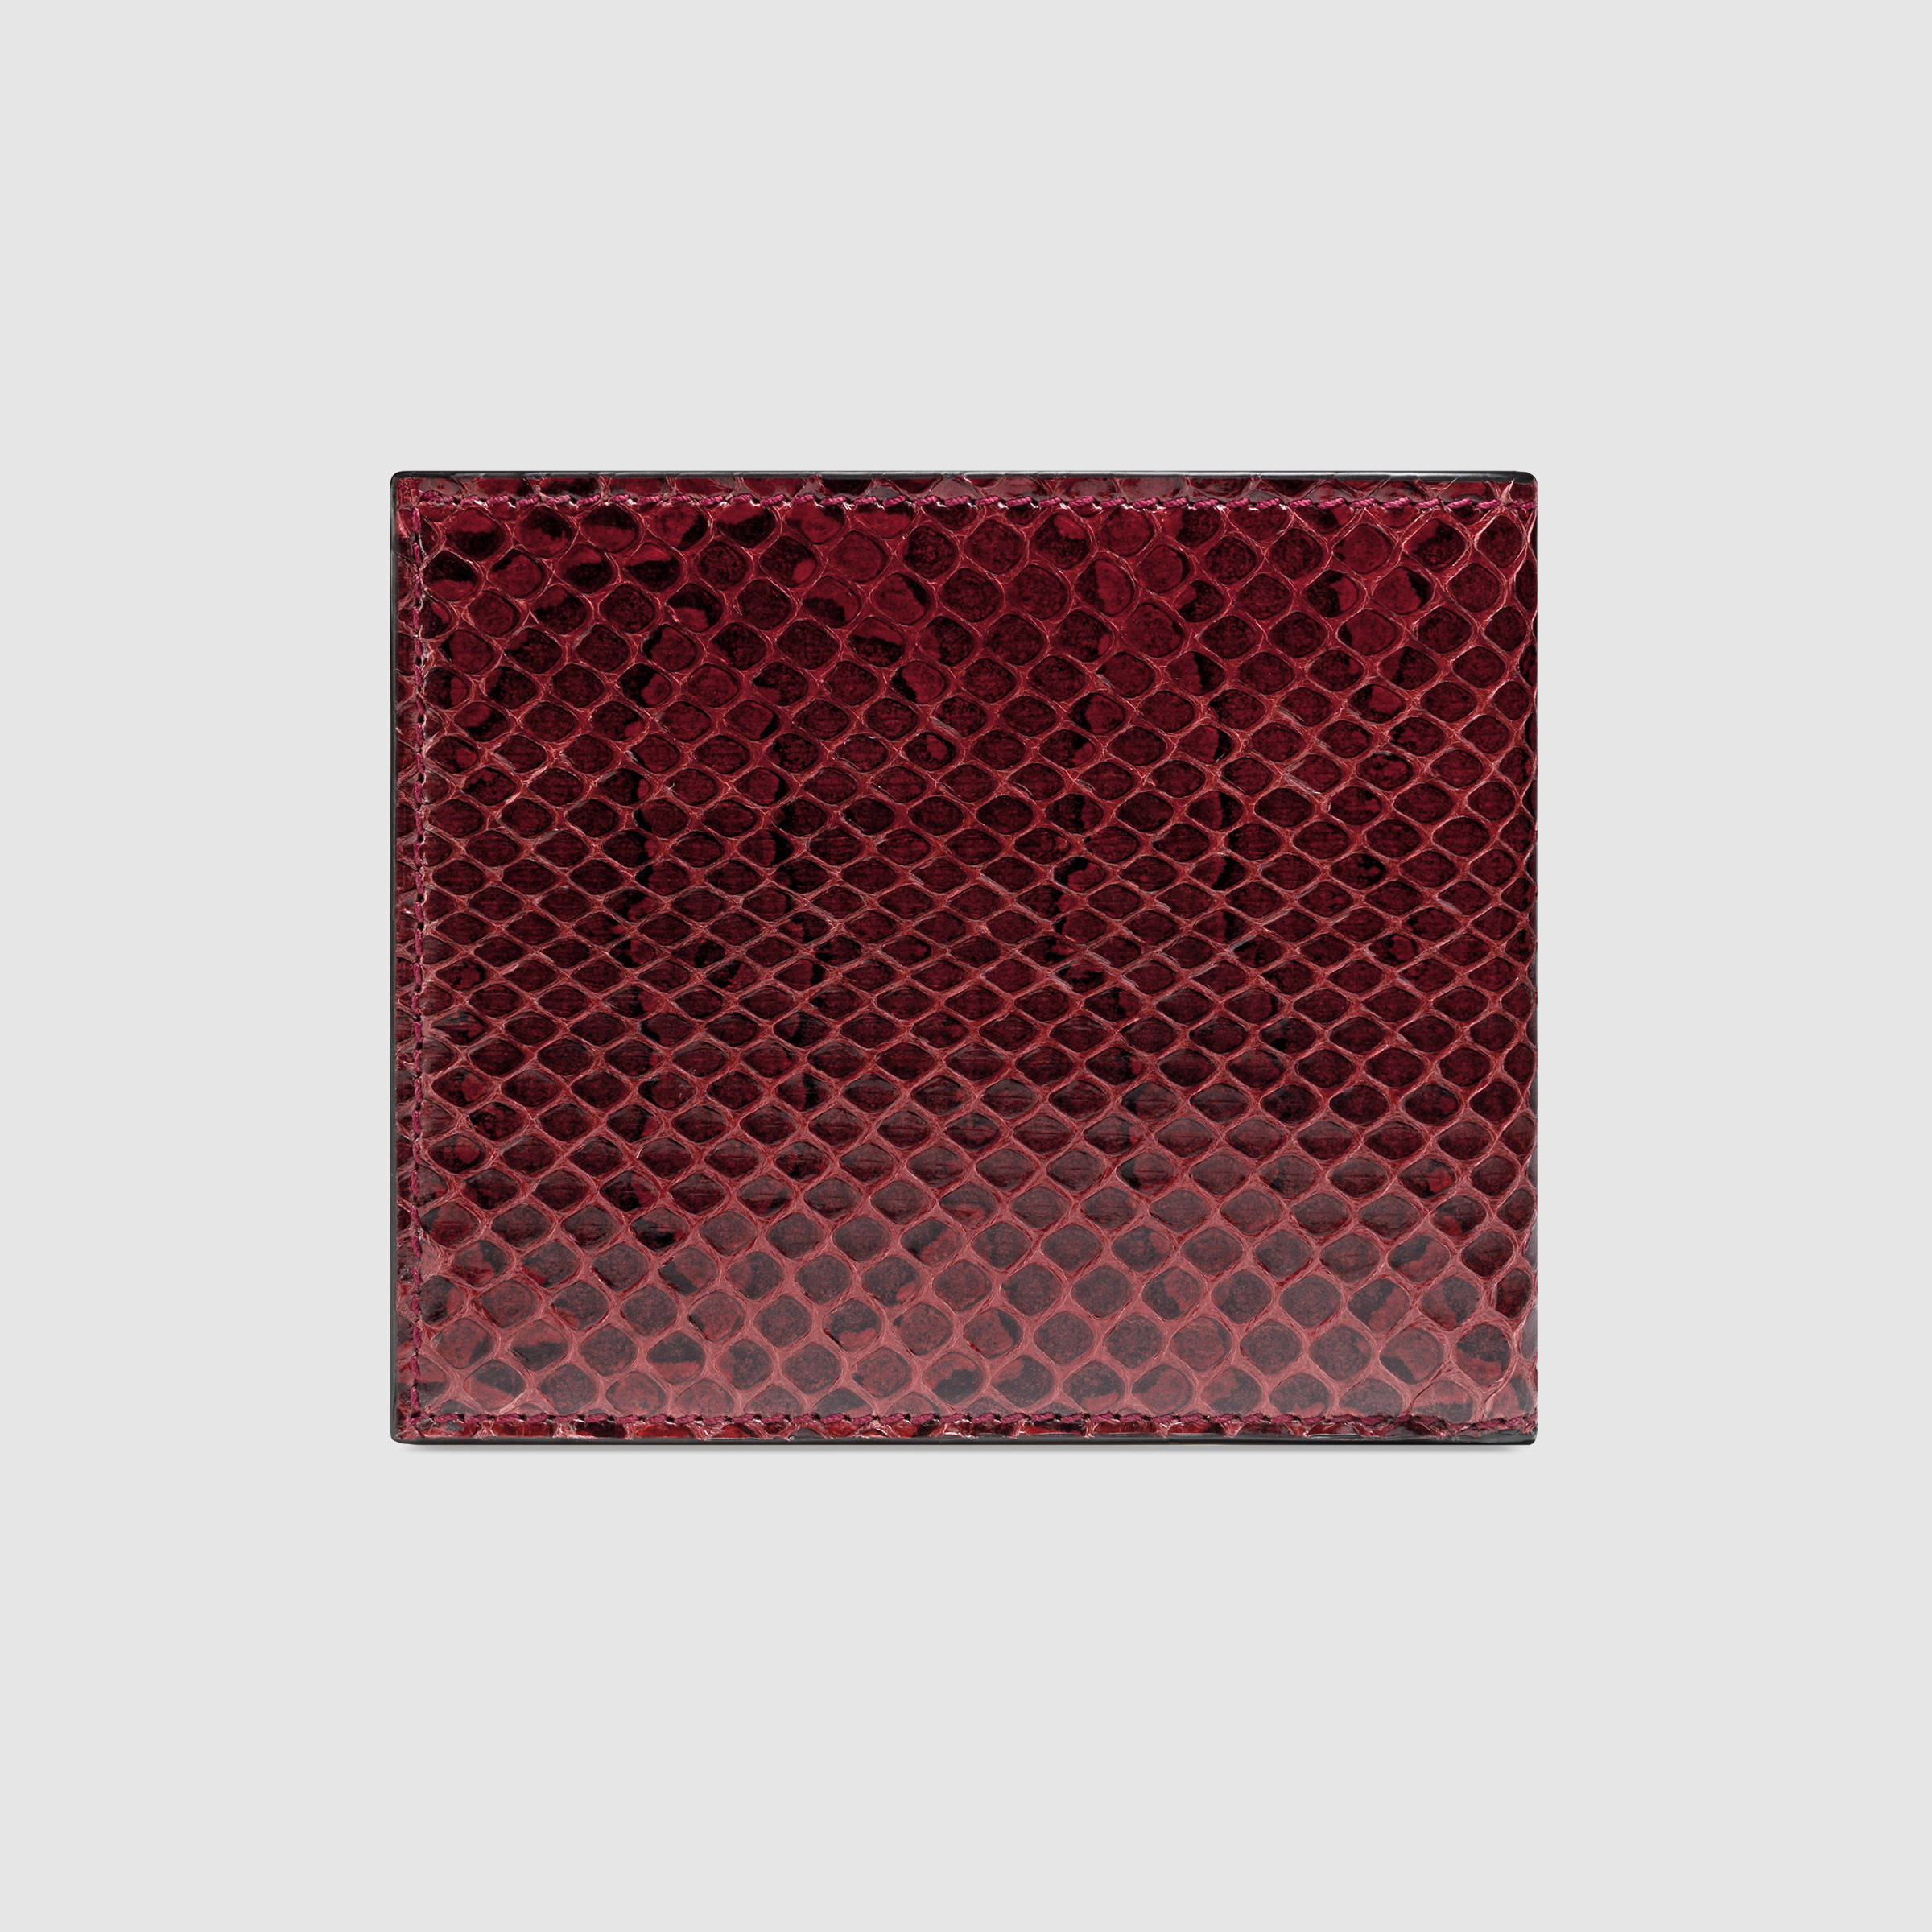 Gucci Ayers Snakeskin Wallet in Red for Men - Lyst